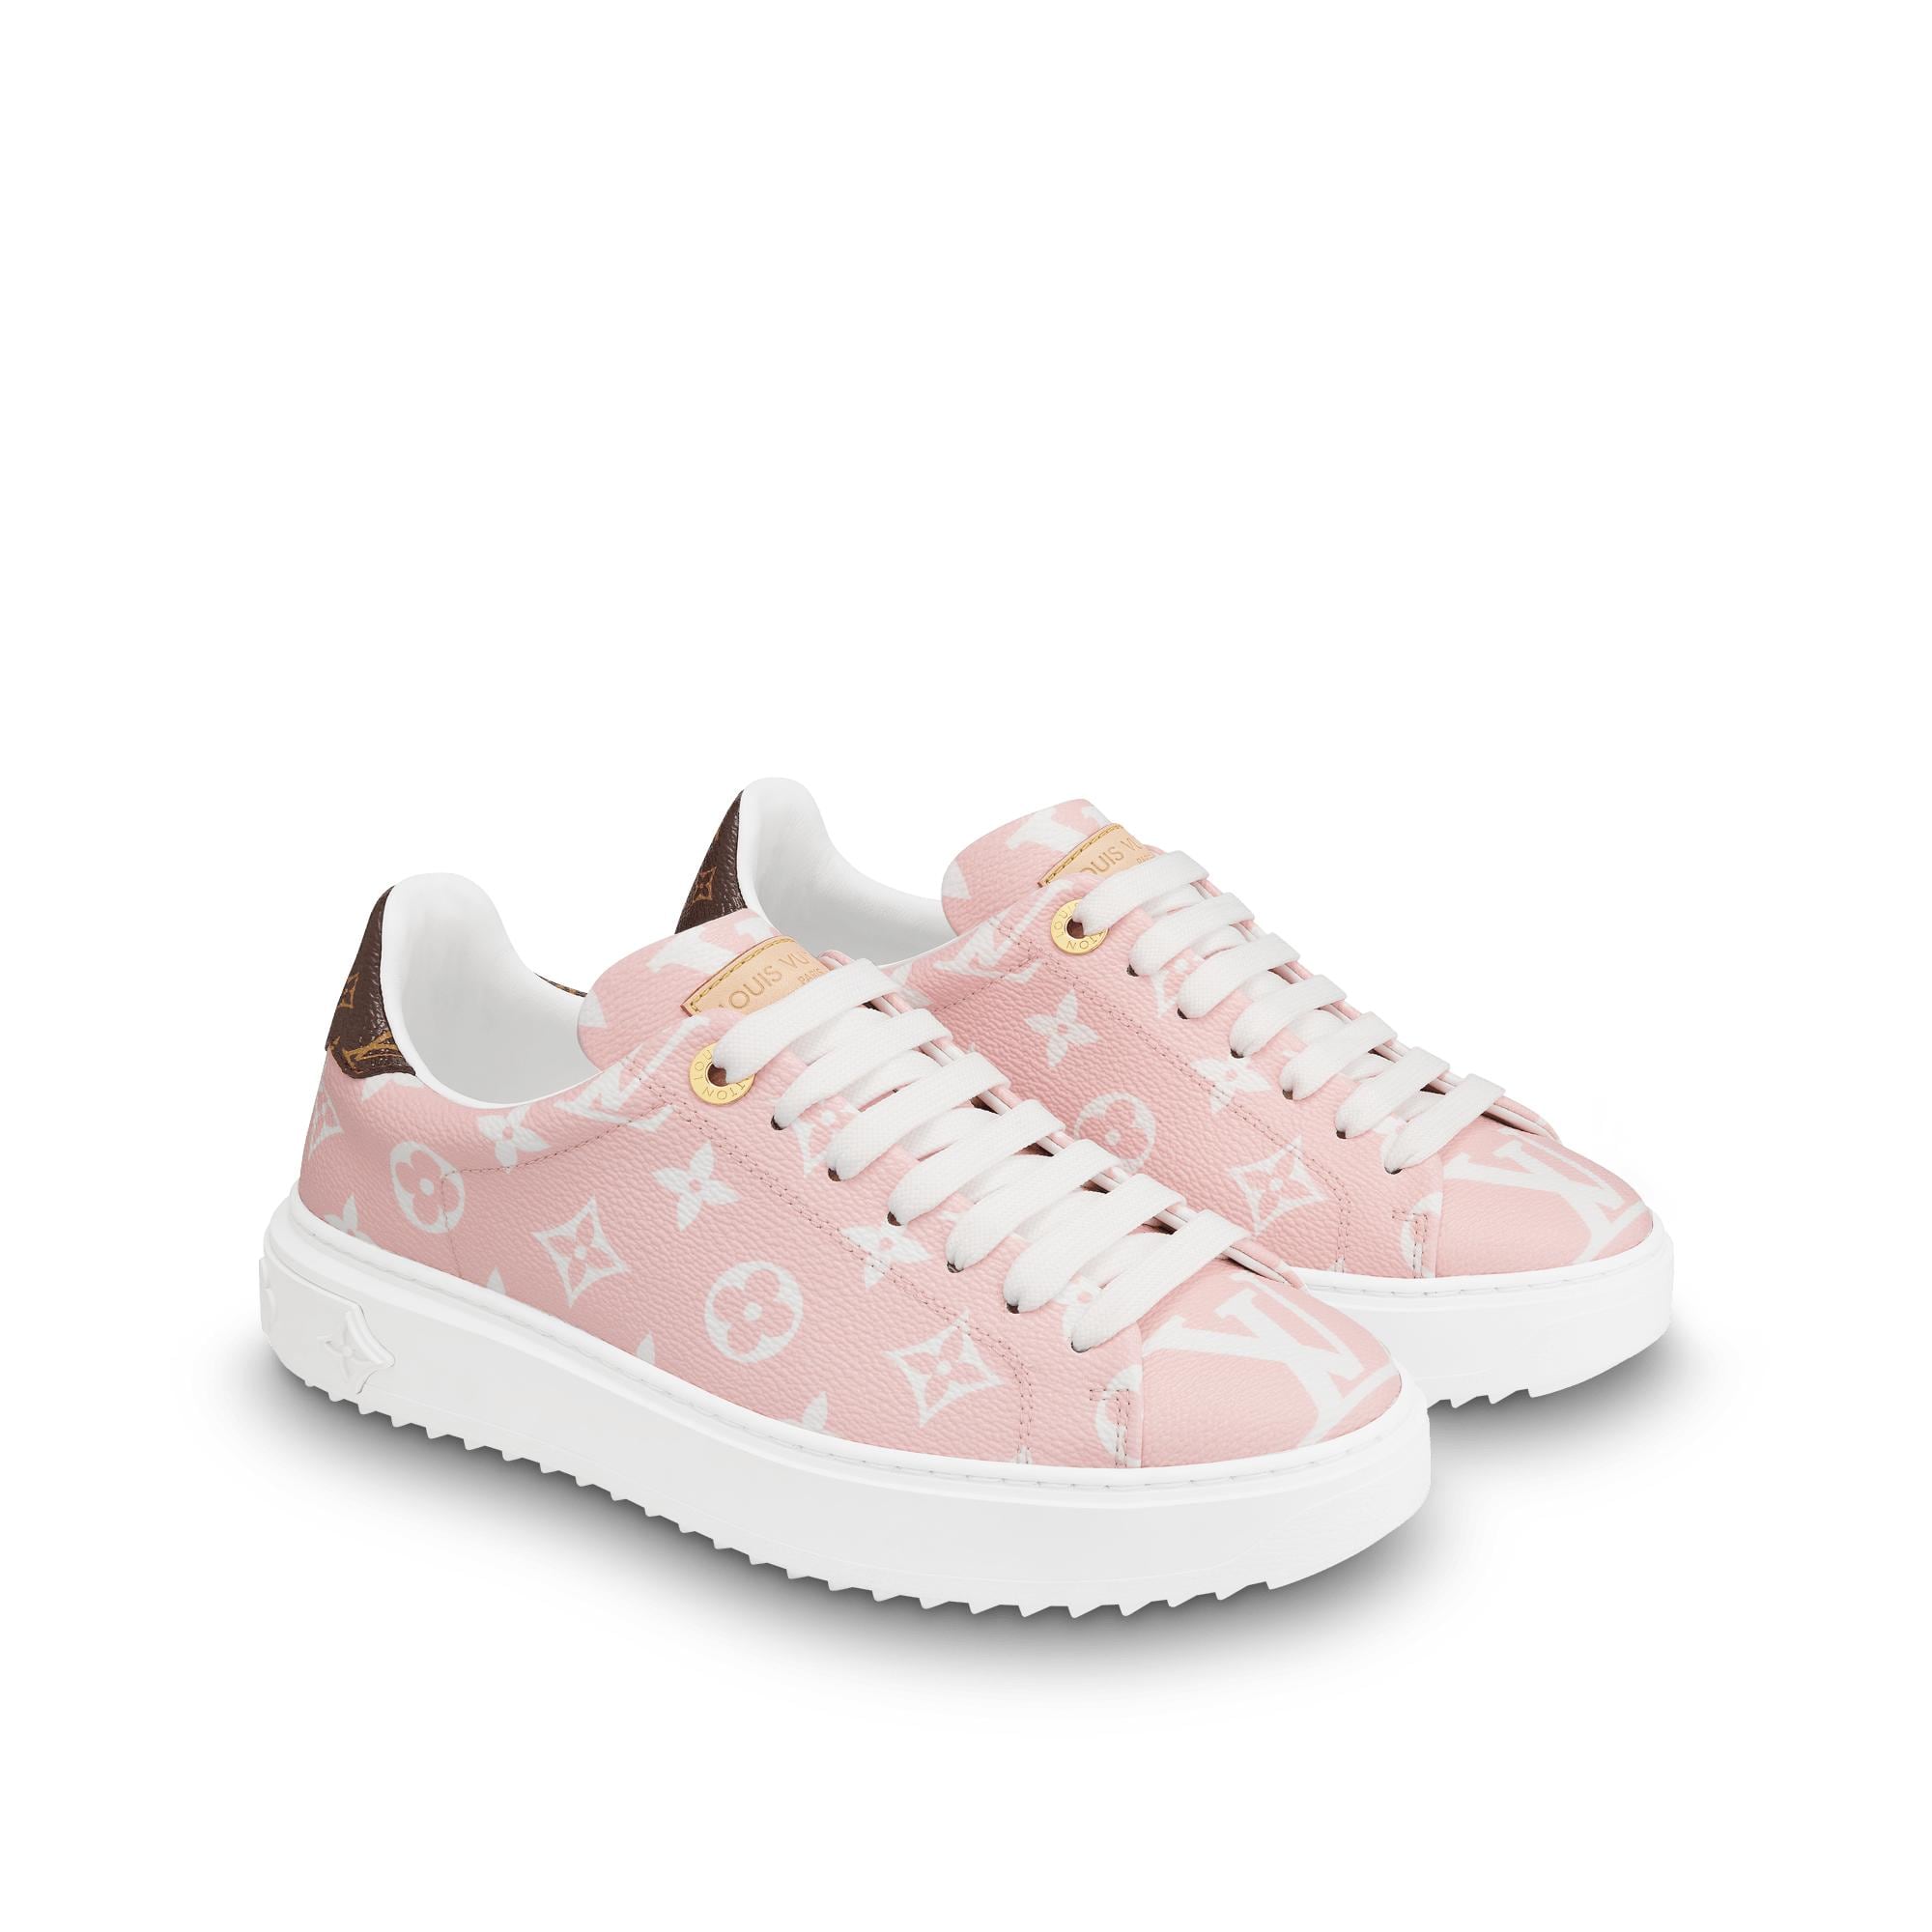 Louis Vuitton x Lady Pink x Lee Quiñones LV Trainer collab: Where to buy,  release date, and more explored